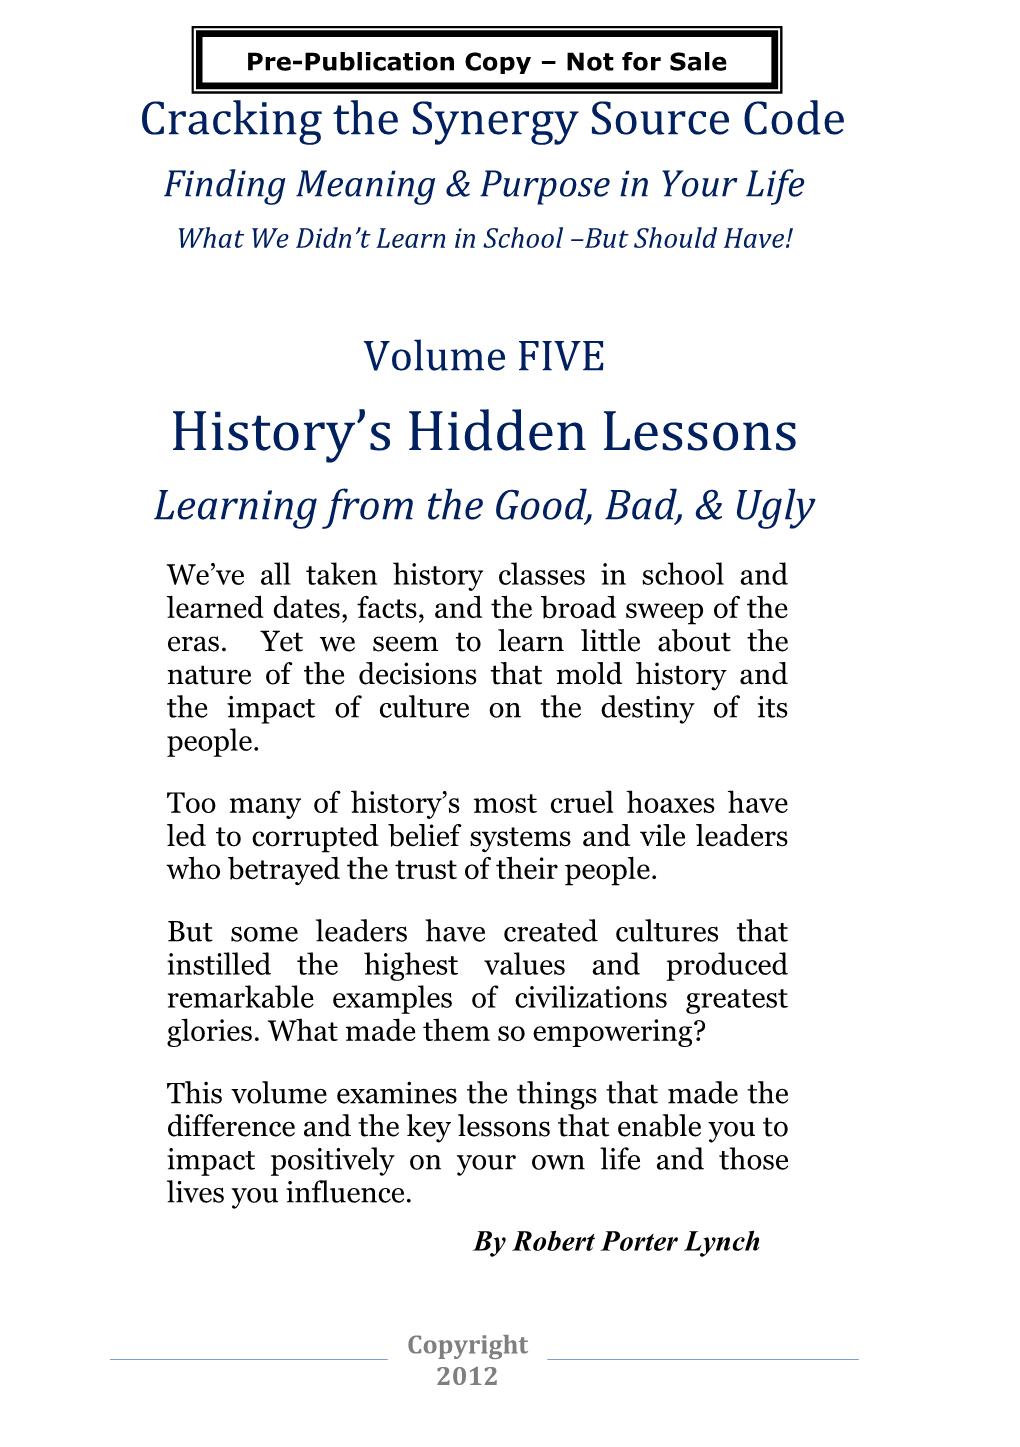 History's Hidden Lessons